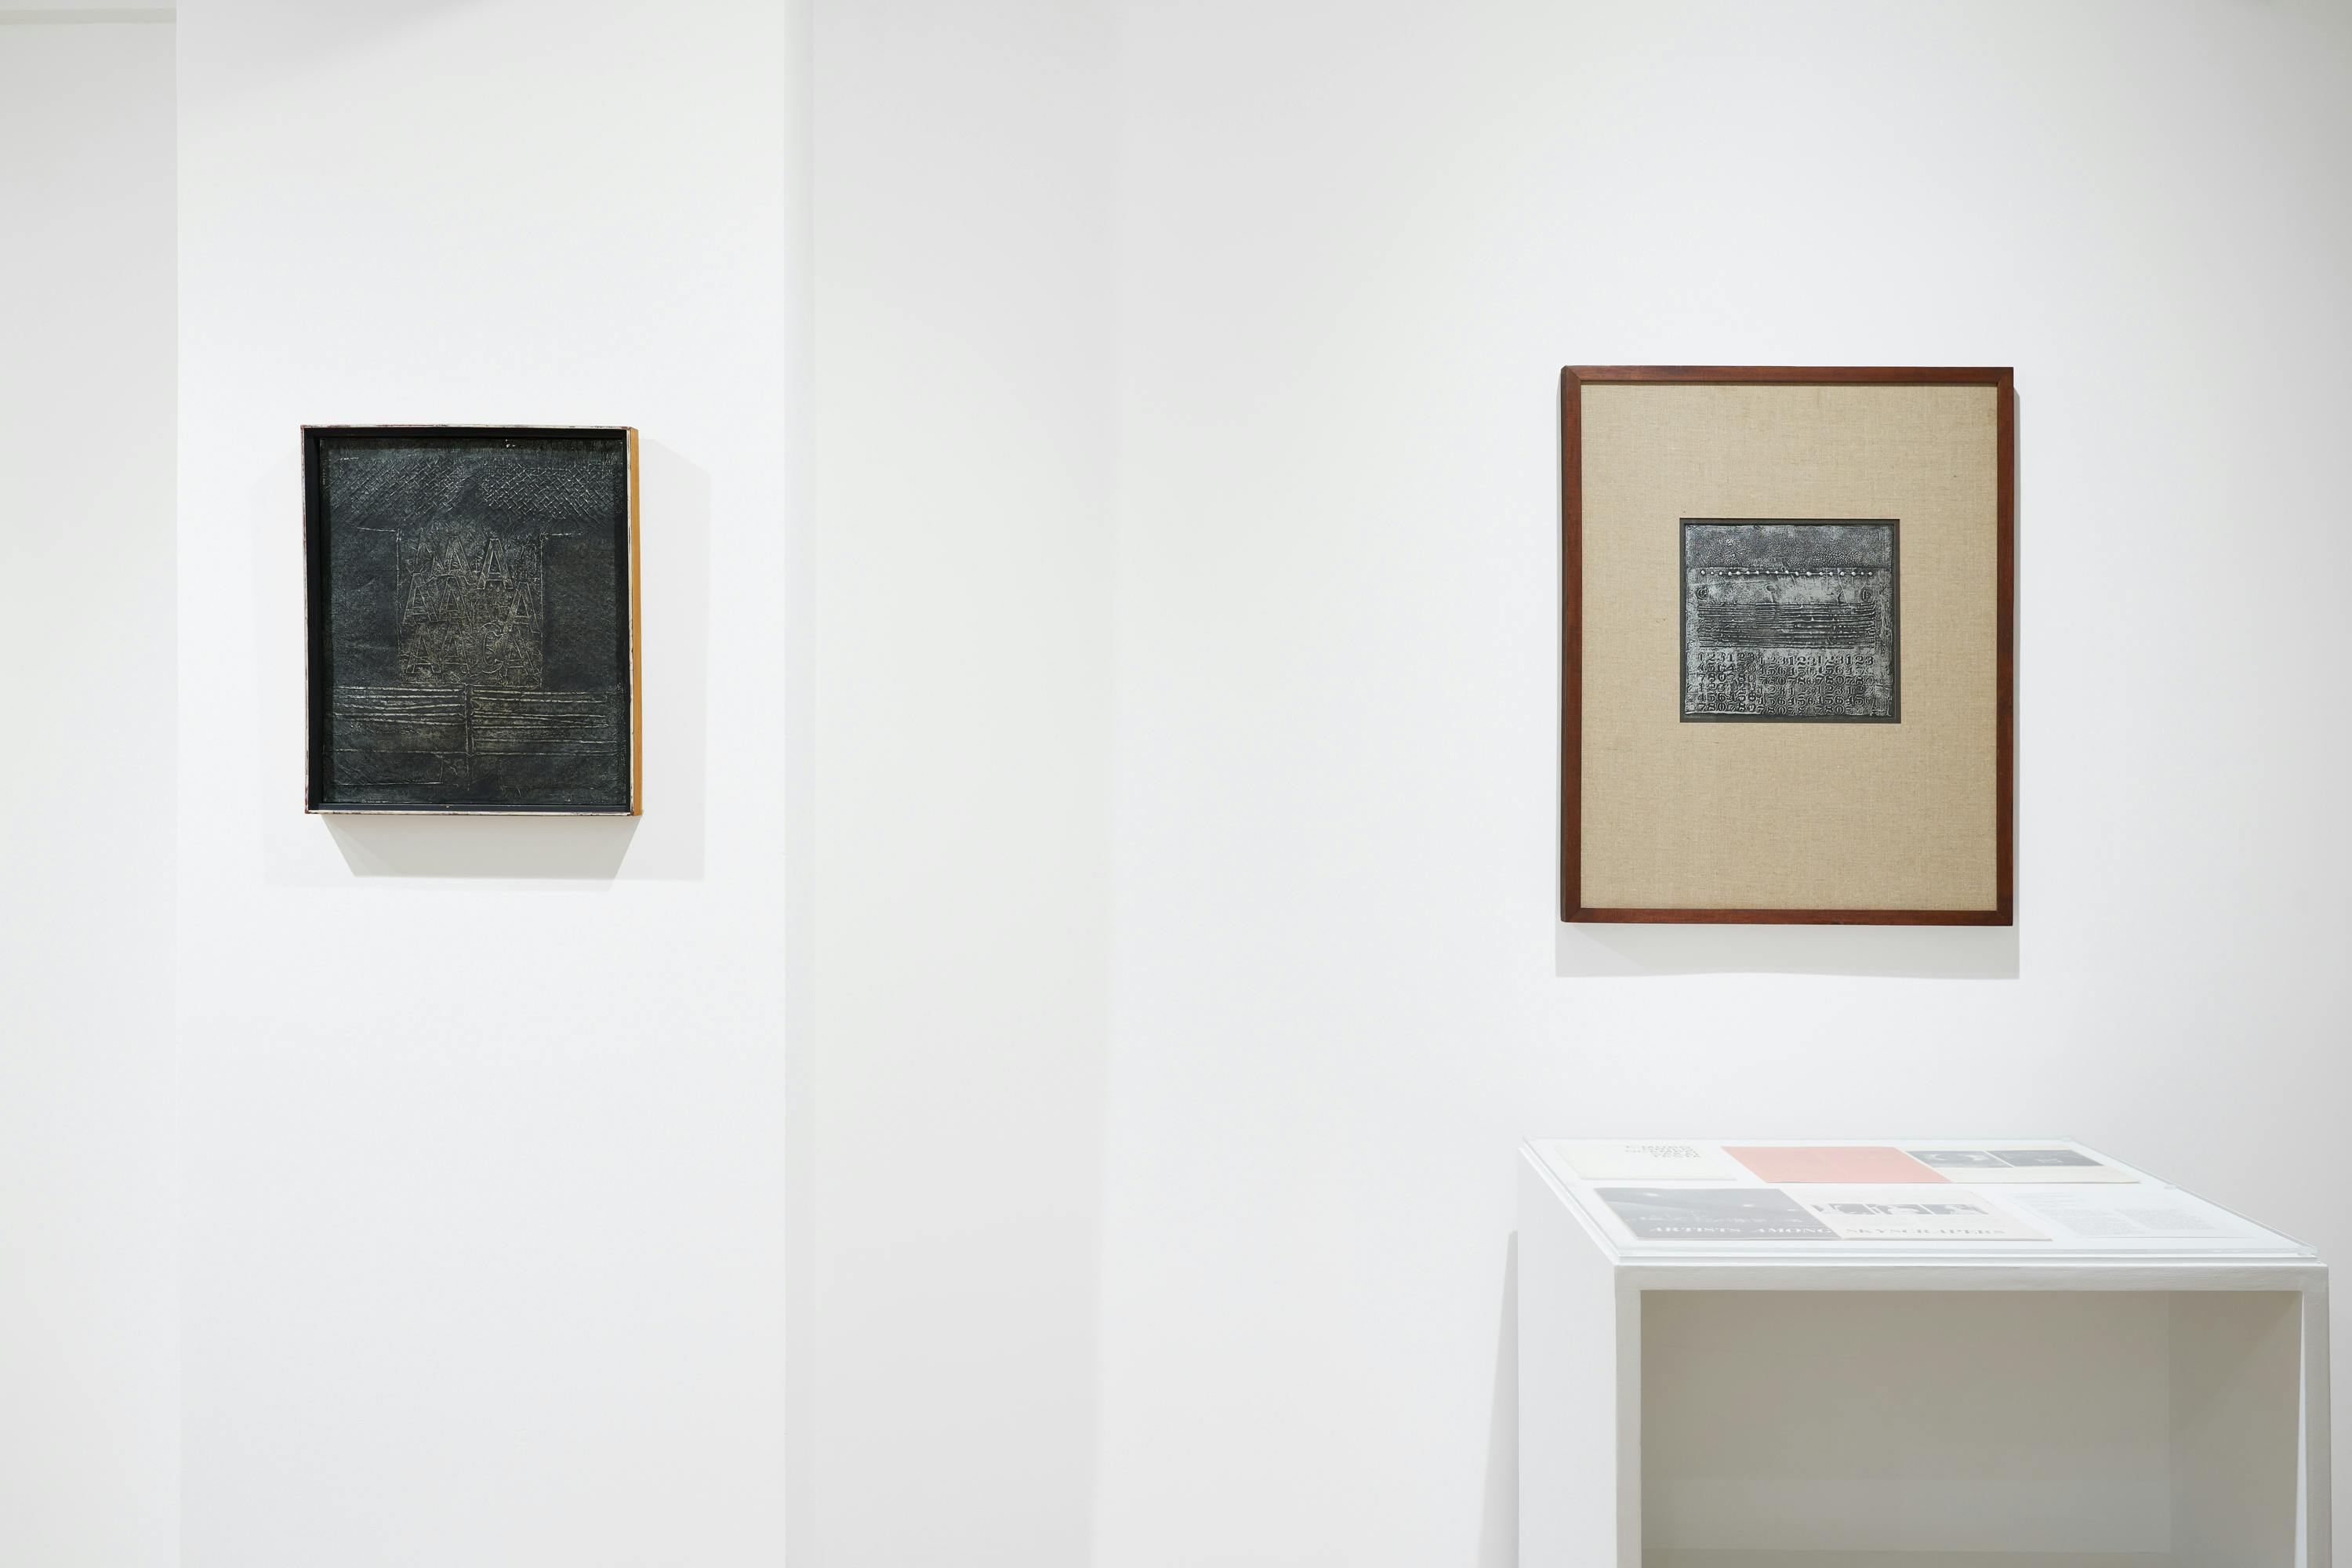 Installation view of two aluminum foil paintings by José Antonio Fernández-Muro and one vitrine.